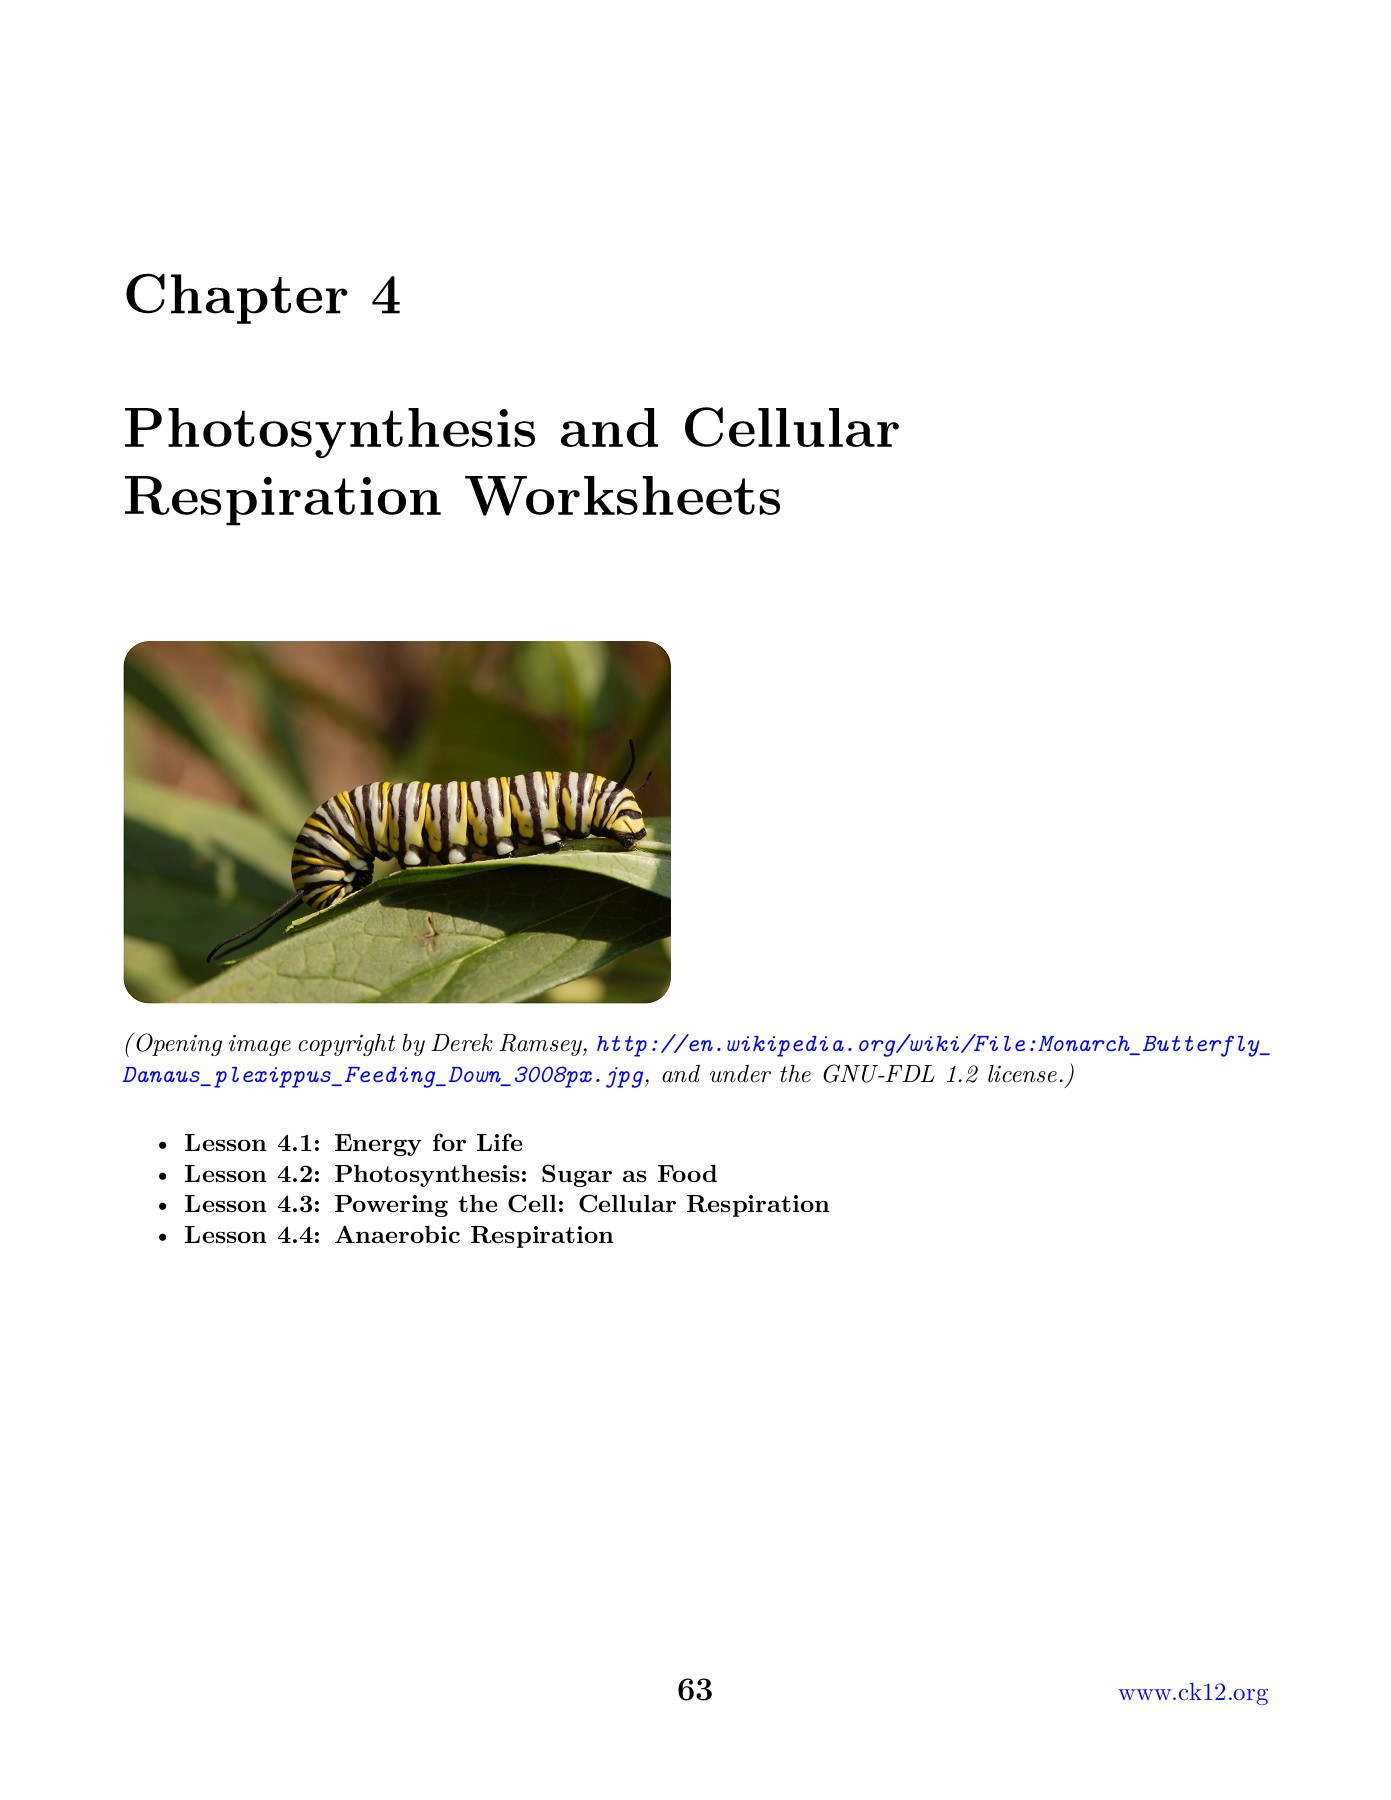 Photosynthesis and Respiration Worksheet Chapter 4 Synthesis and Cellular Respiration Worksheets